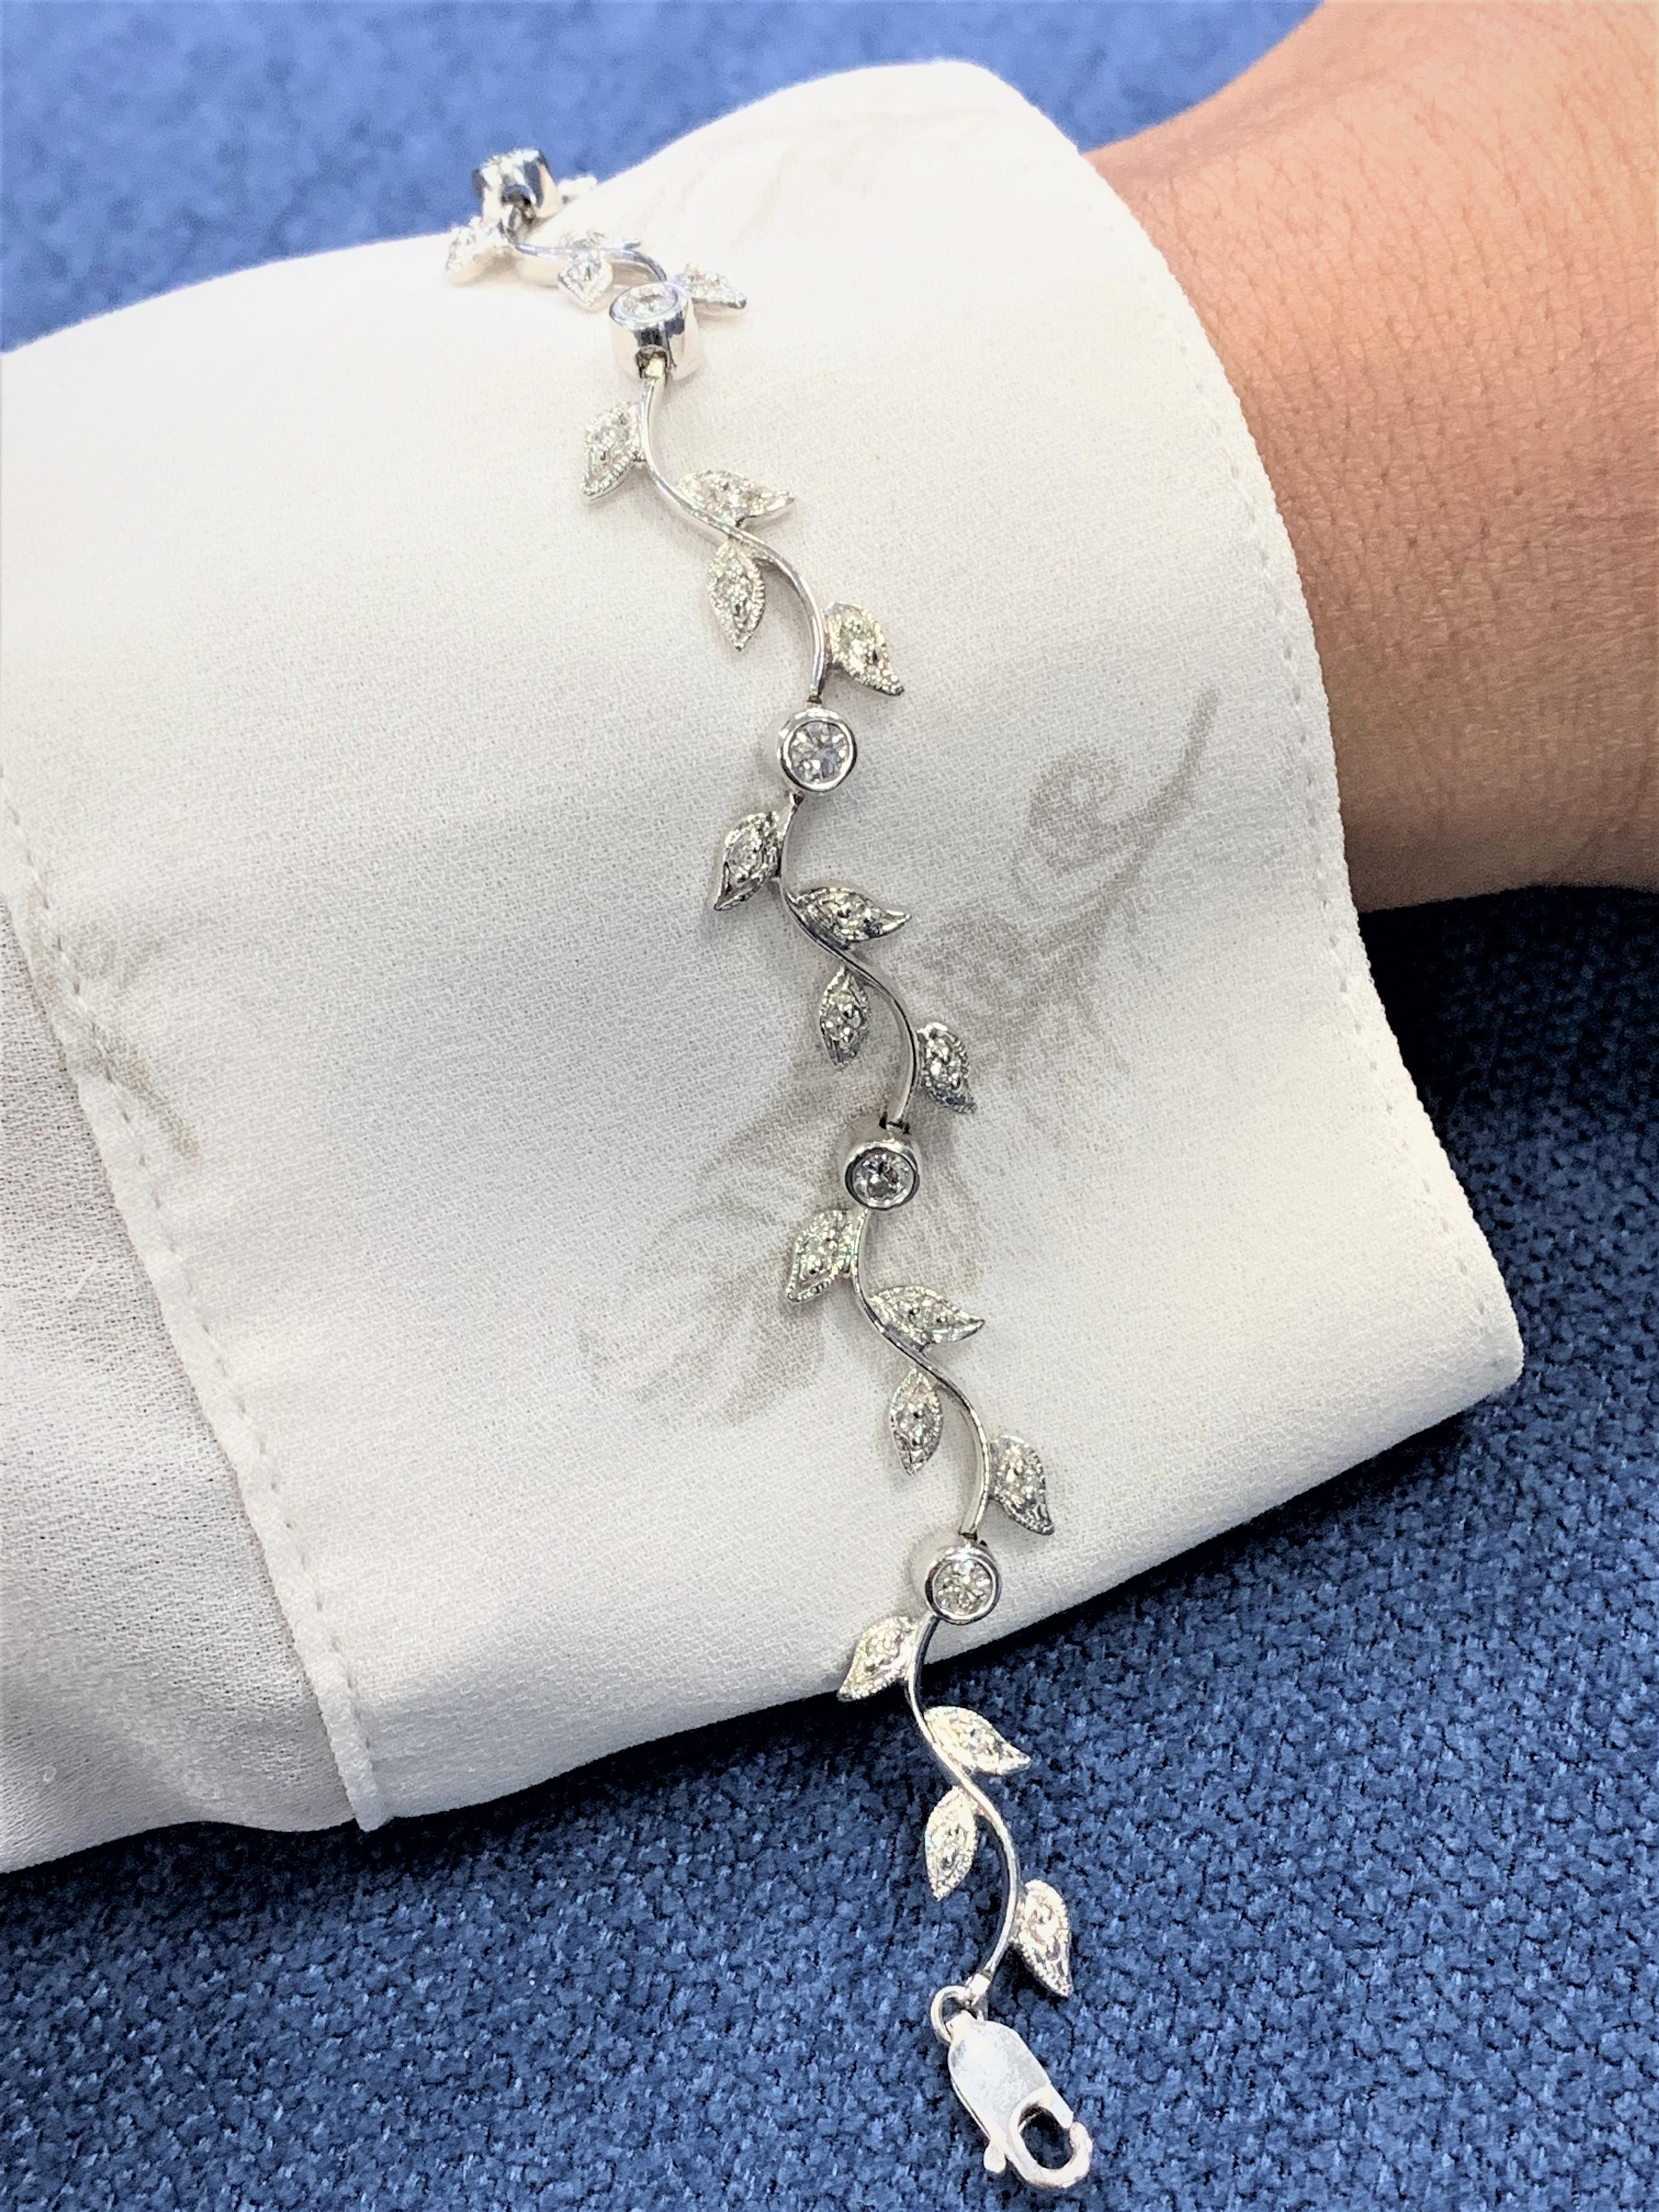 The Grape Vine Diamond Bracelet is a delicate accessory that reflects a touch of nature.

Total Diamond Weight: 1.09 ct 
Average Diamond Weight: 0.03 ct 
Diamond Color: G - H
Diamond Clarity: SI

Metal: 14K White Gold
Metal Wt: 11.88 gms 
Setting: